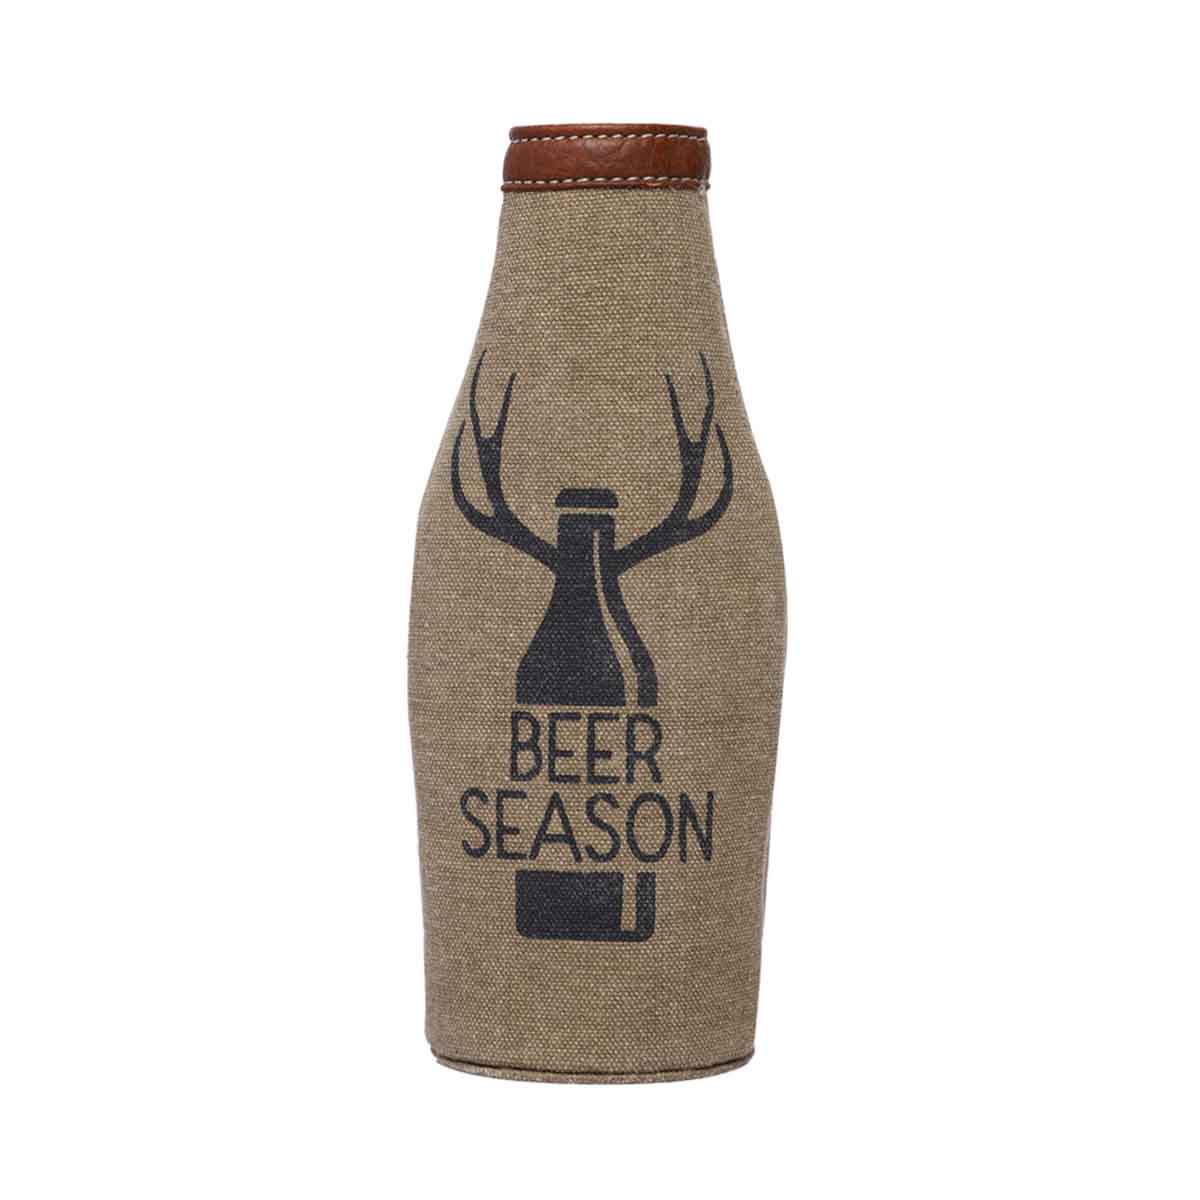 Mona B Men and Women Leather Stylish Printing Beer Bottle Covers (Multicolour)